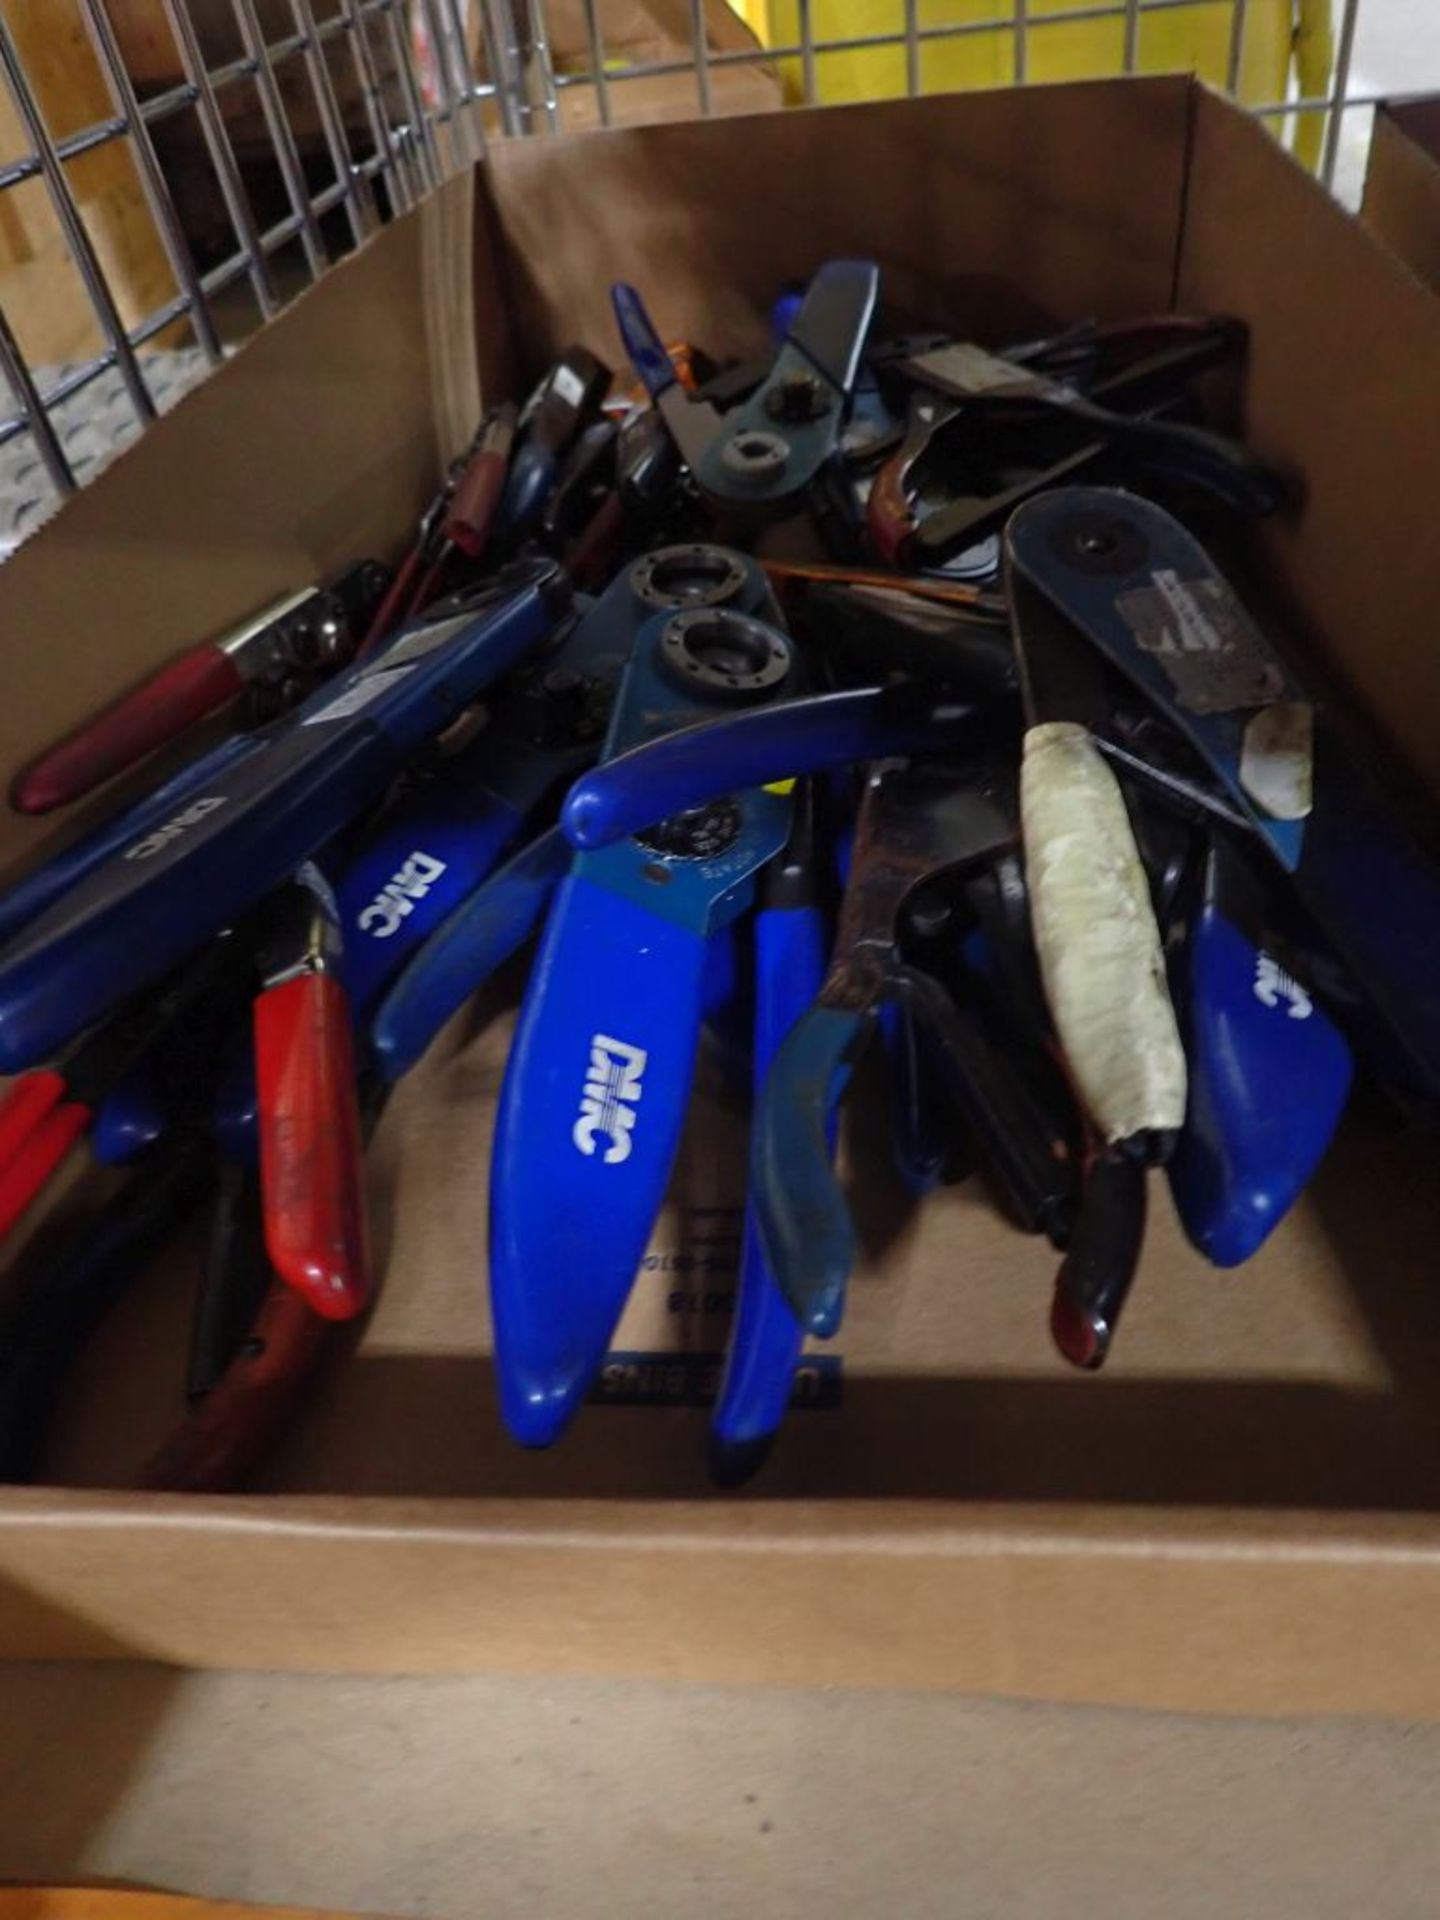 Lot of Assorted Tools | Tag: 241628 | Limited Forklift Assistance Available - $10.00 Lot Loading - Image 2 of 4